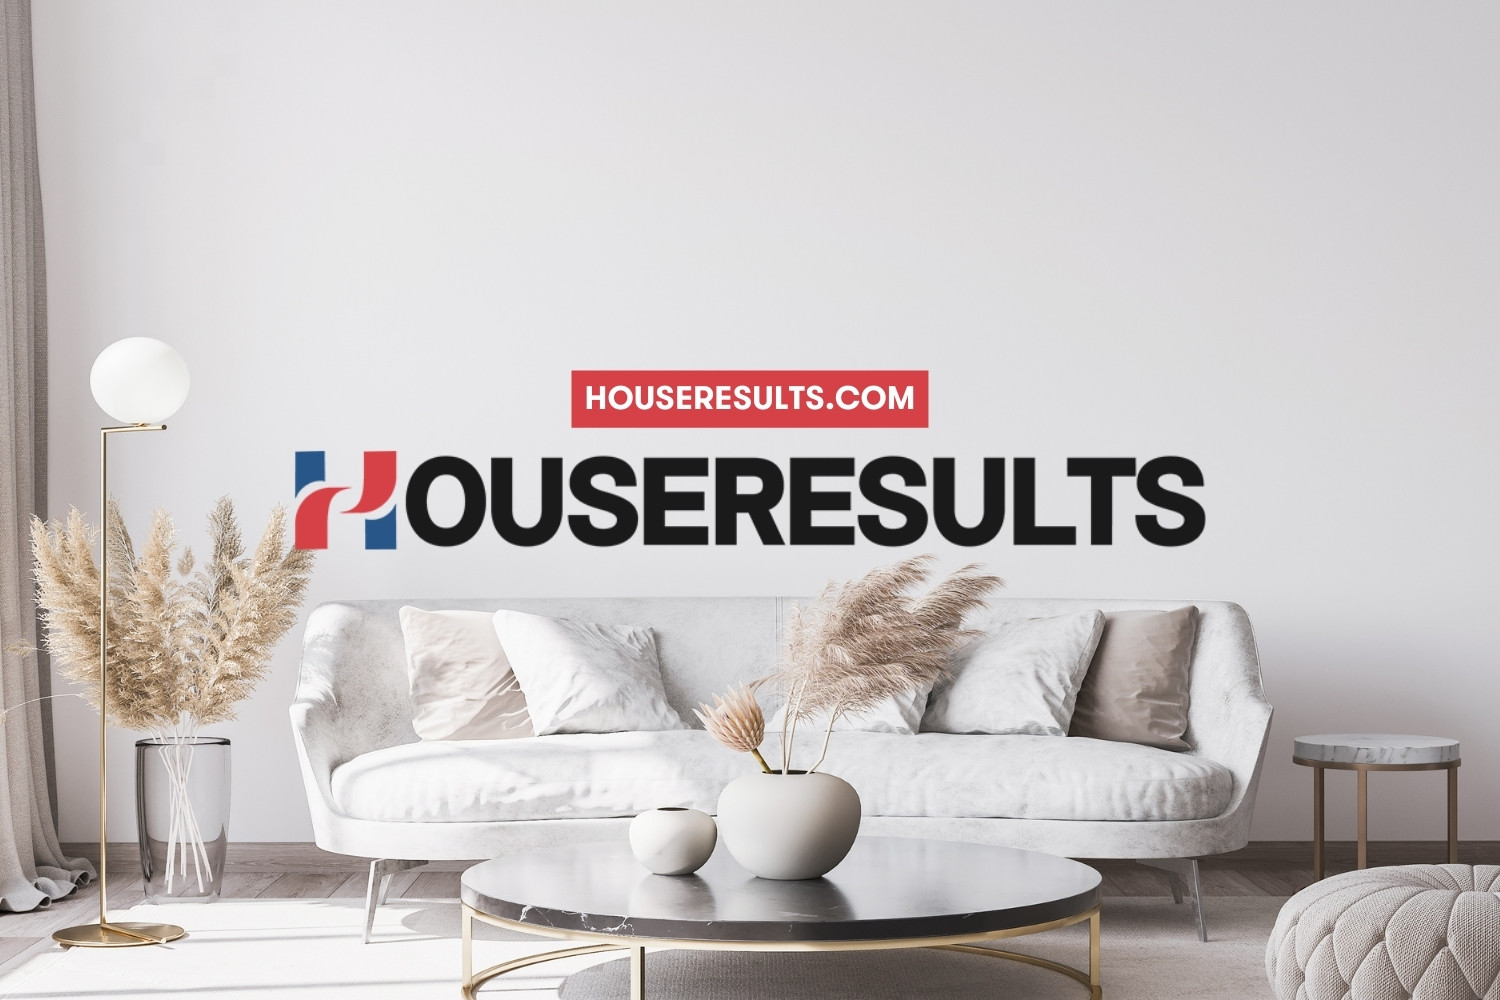 Houseresults